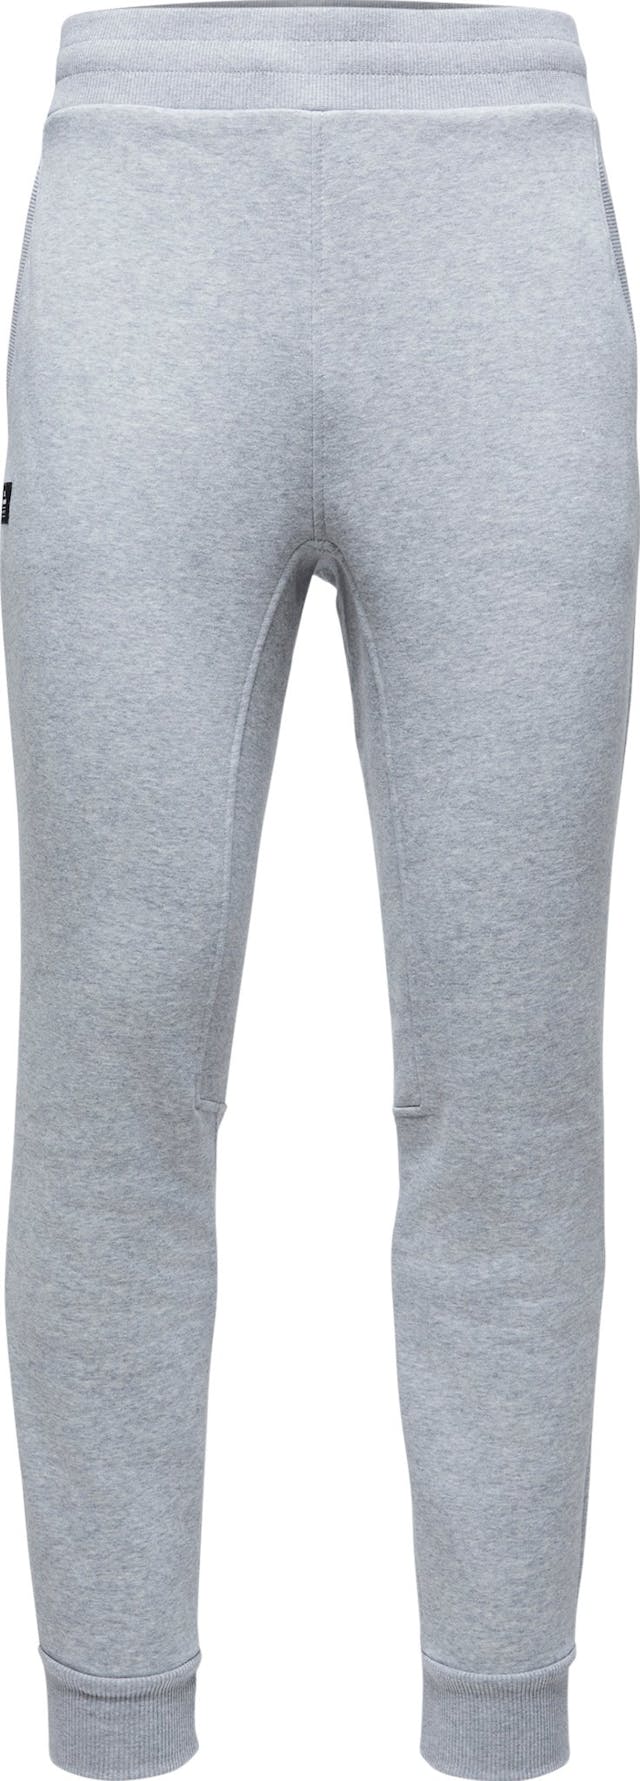 Product image for ANY-Time Sweats Jogger - Unisex